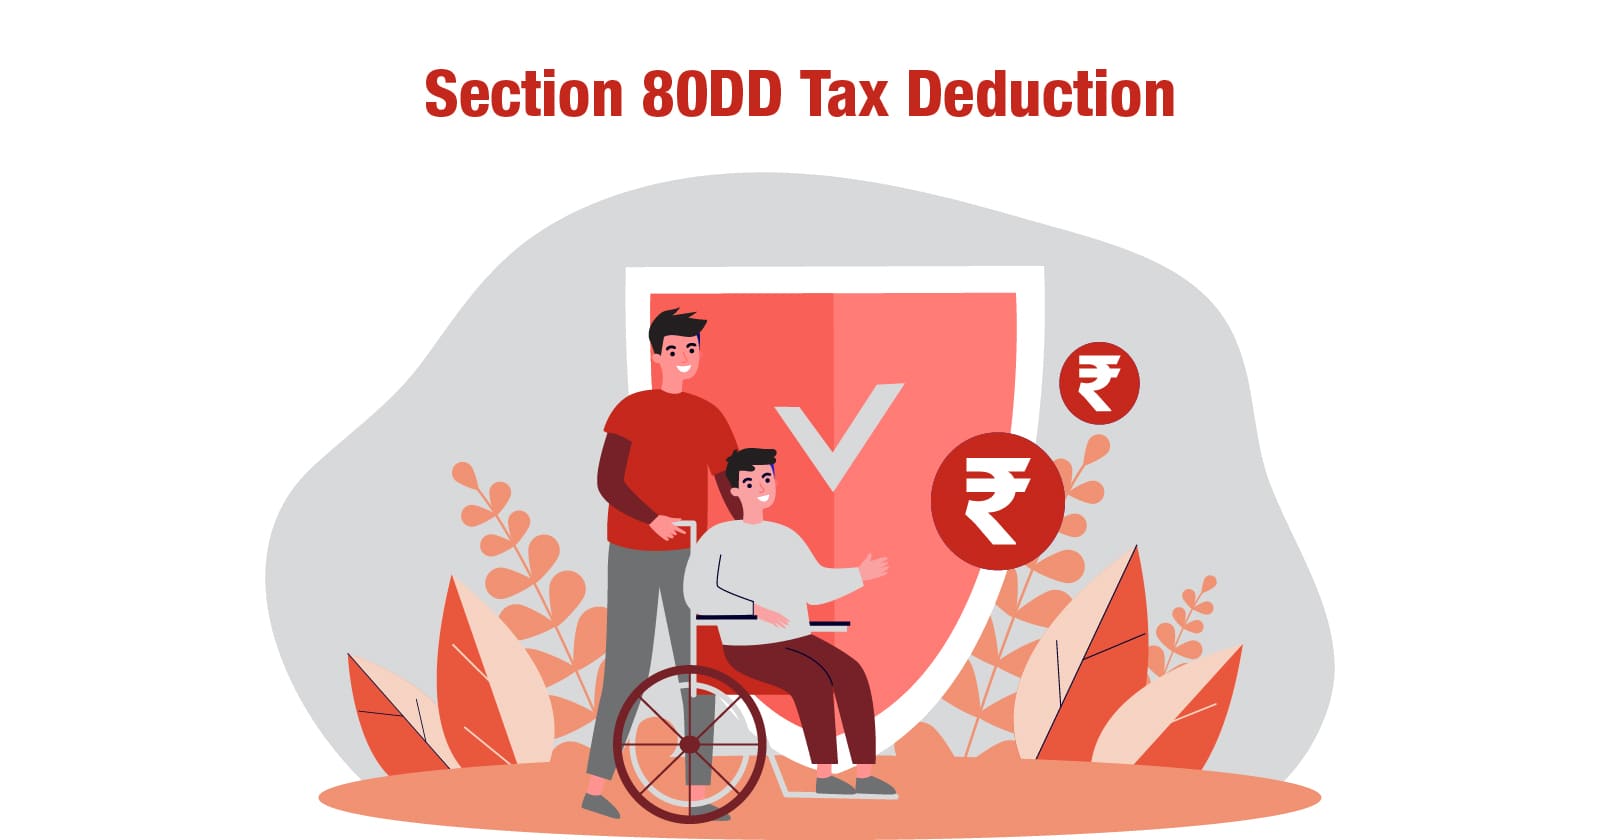 How To Claim Deduction Under Section 80dd